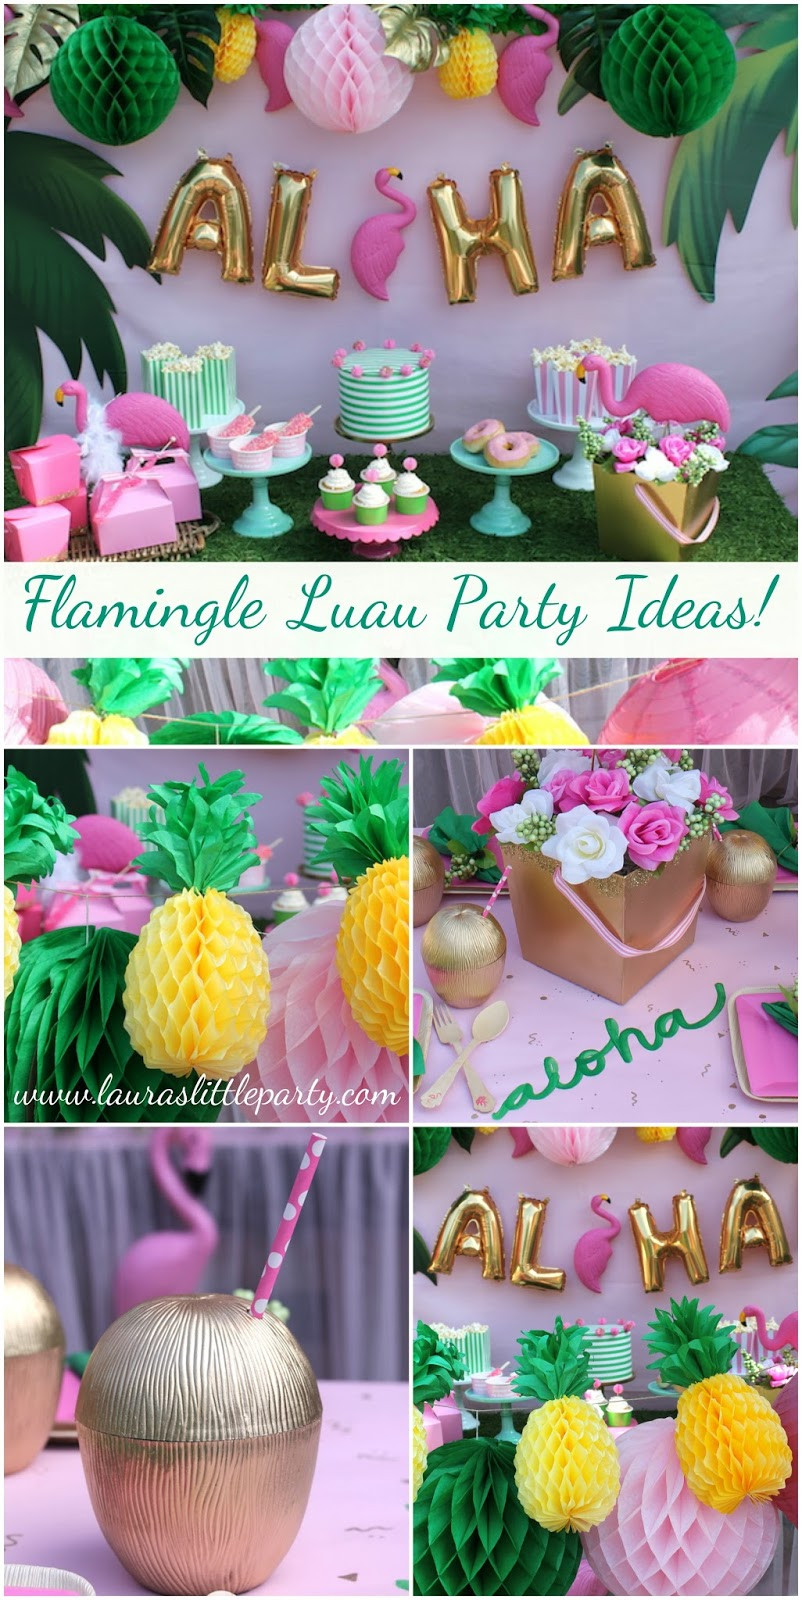 Summer Teenage Party Ideas
 Let s Flamingle Luau Summer Party Ideas LAURA S little